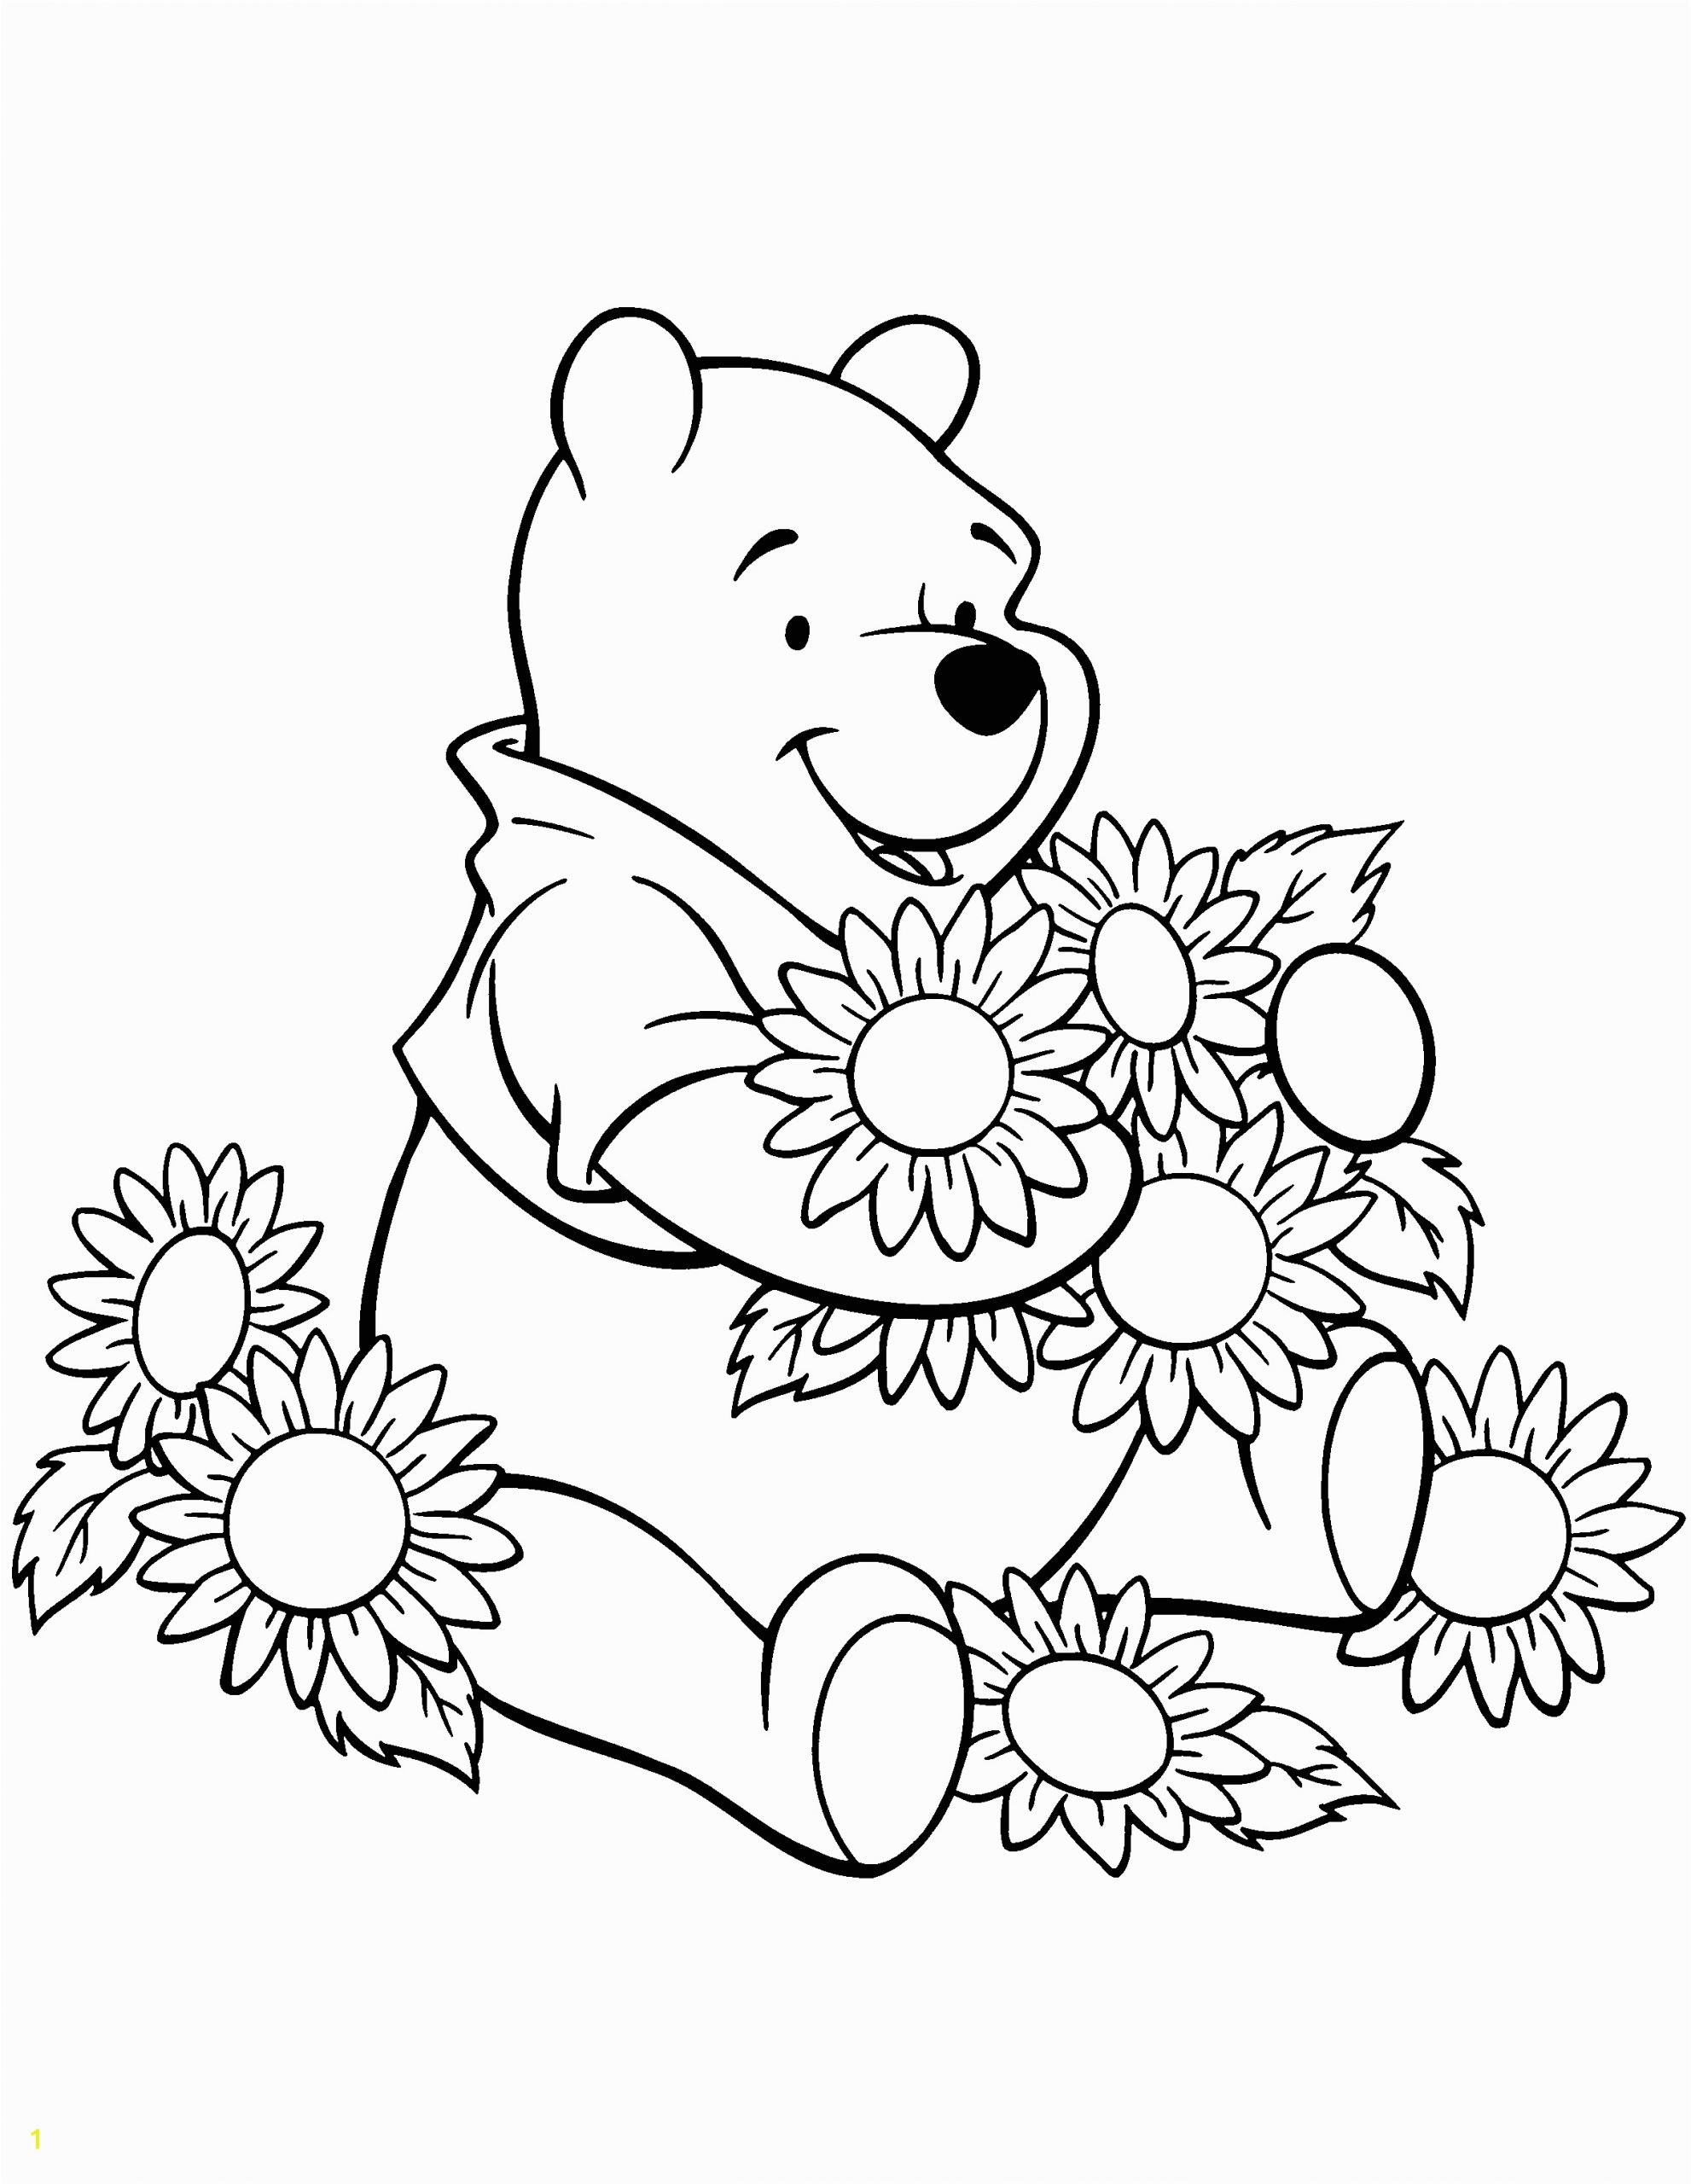 Printable Winnie the Pooh Coloring Pages Coloring Pages Winnie the Pooh Classic Coloring Home